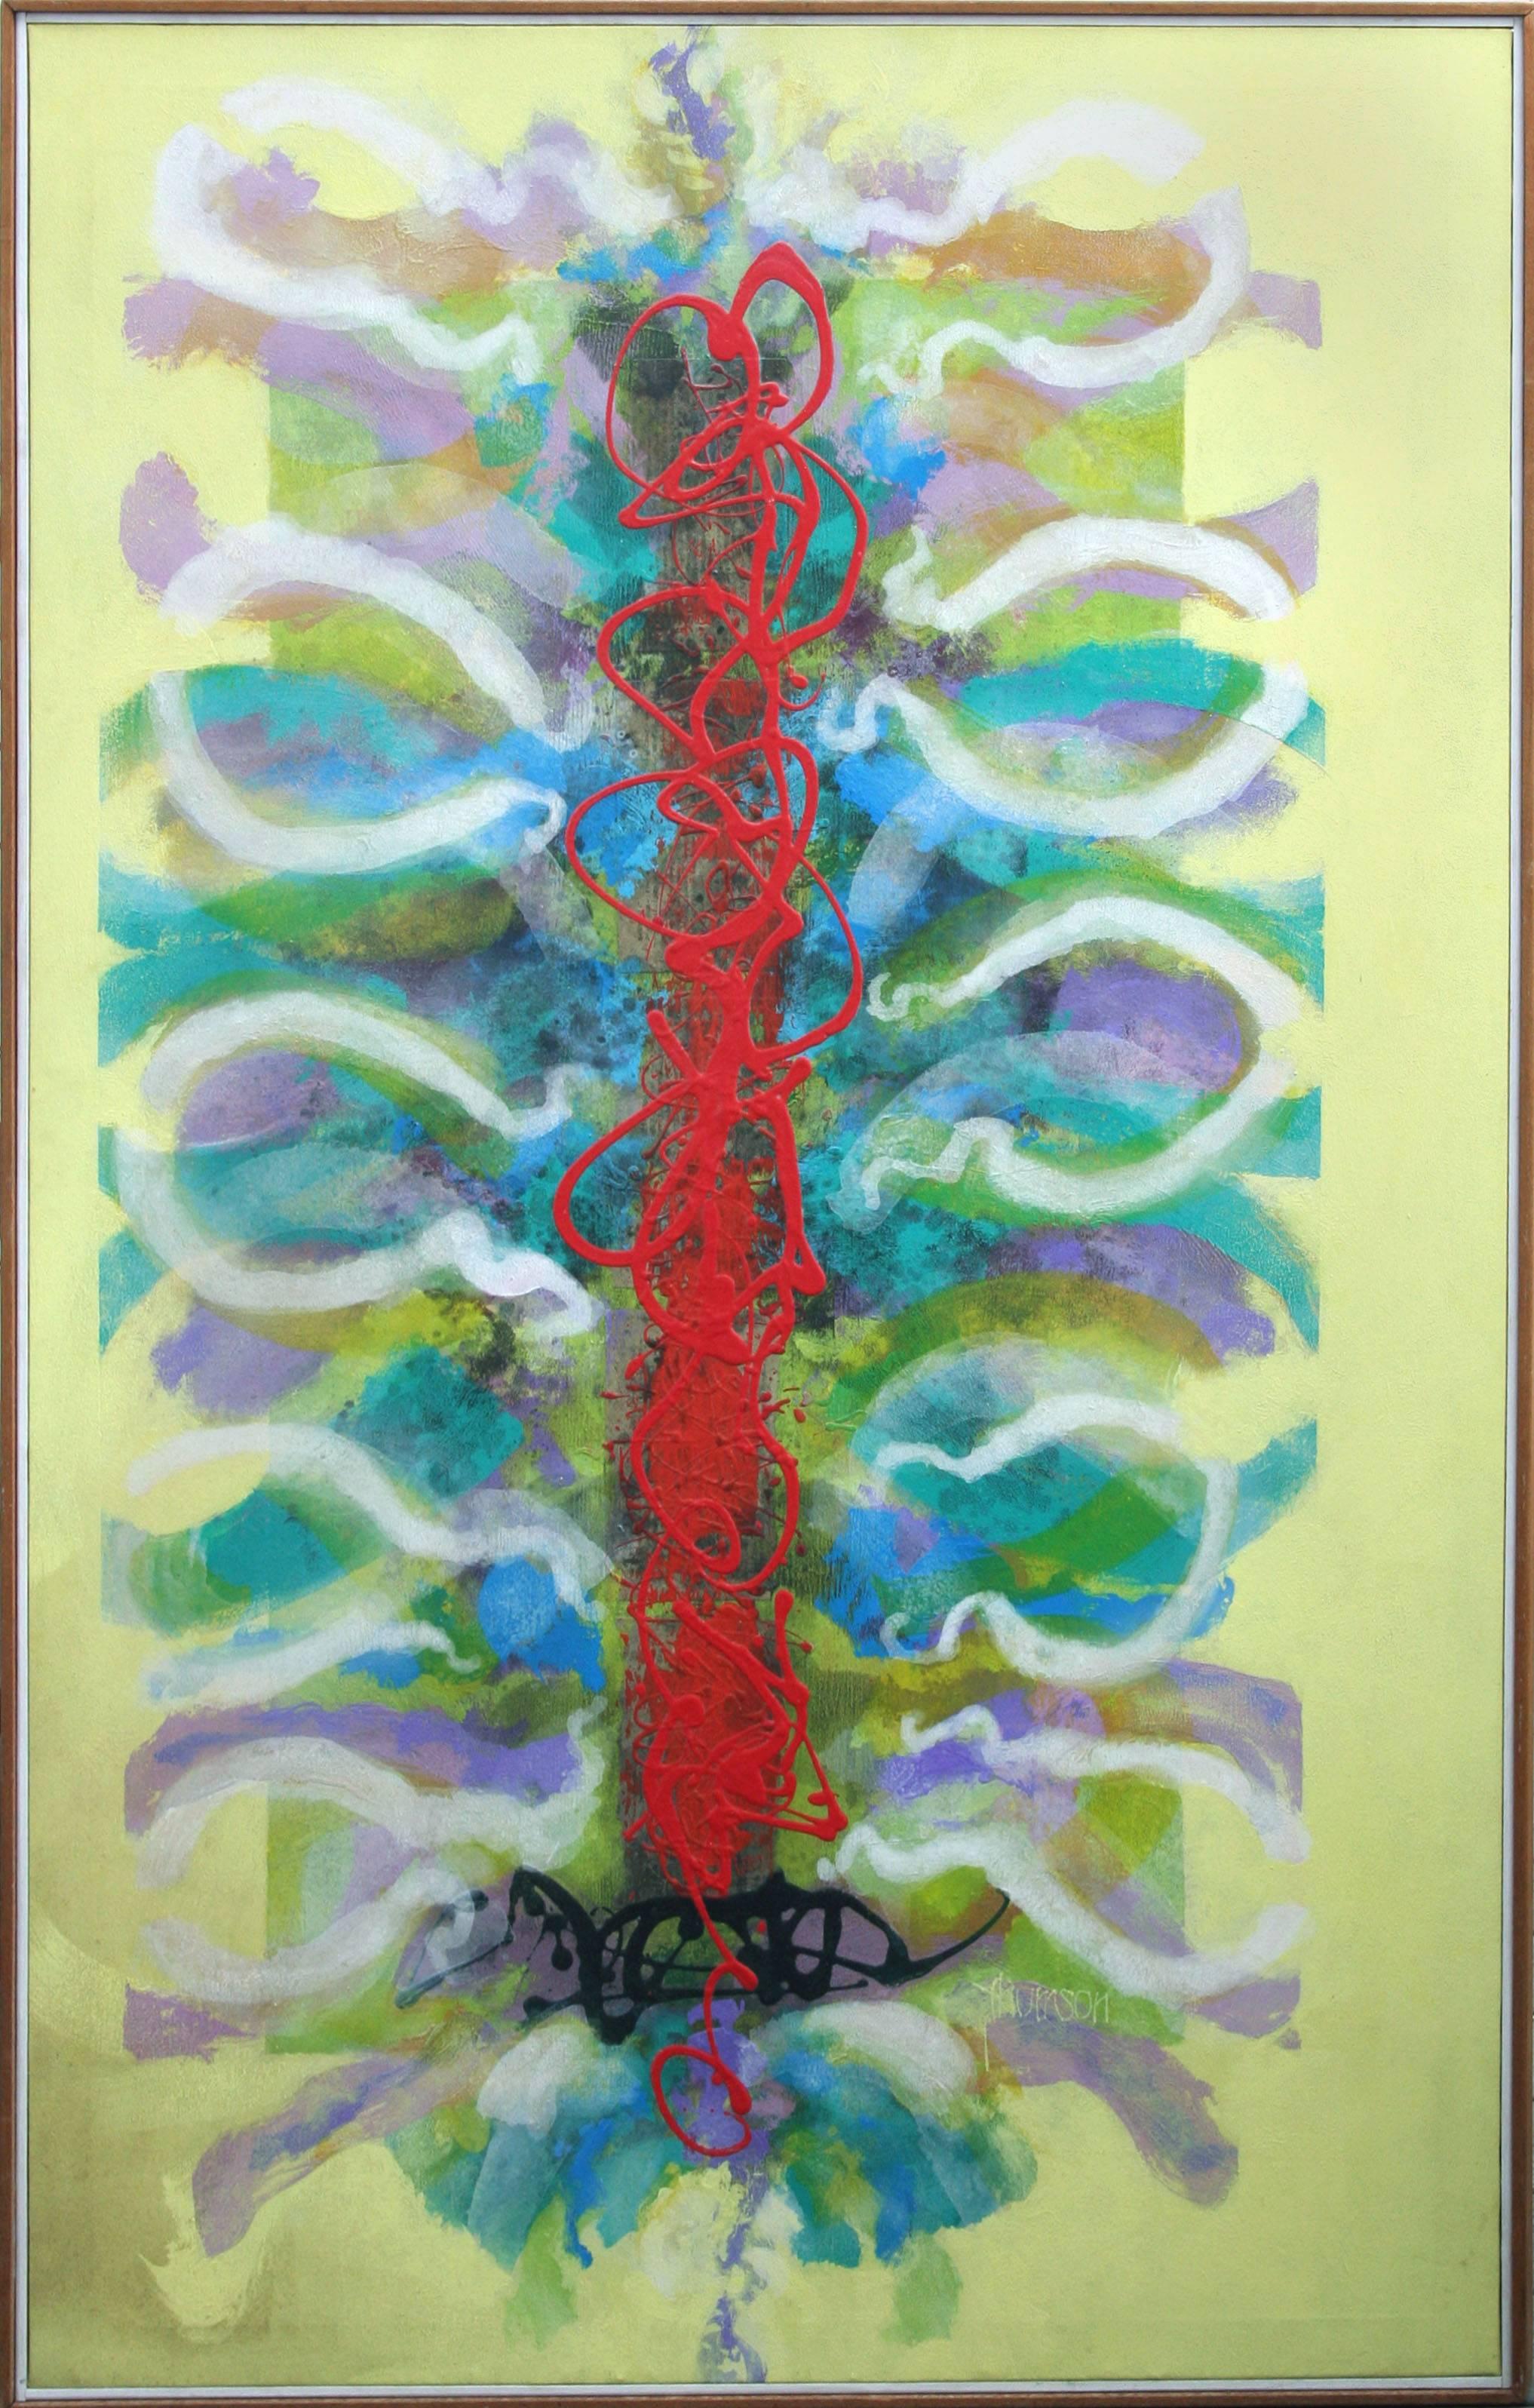 Column of Color and Energy by John O. Thomson 1